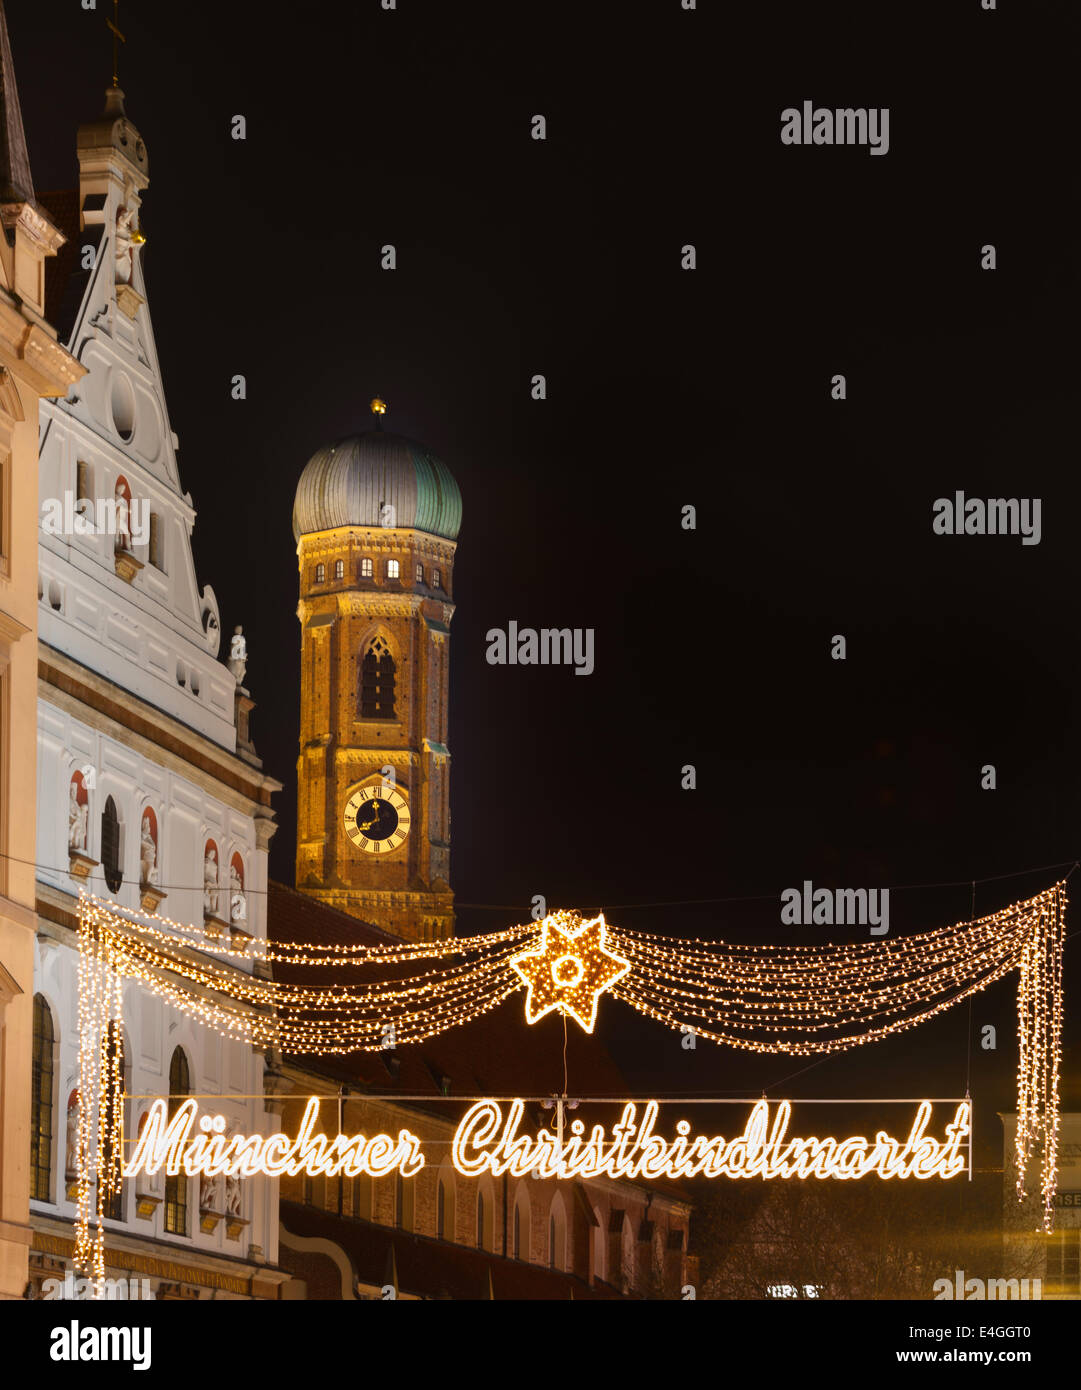 The Munich markets are breathtakingly beautiful with fairy lights lining the streets and illuminated Christmas trees and stars d Stock Photo